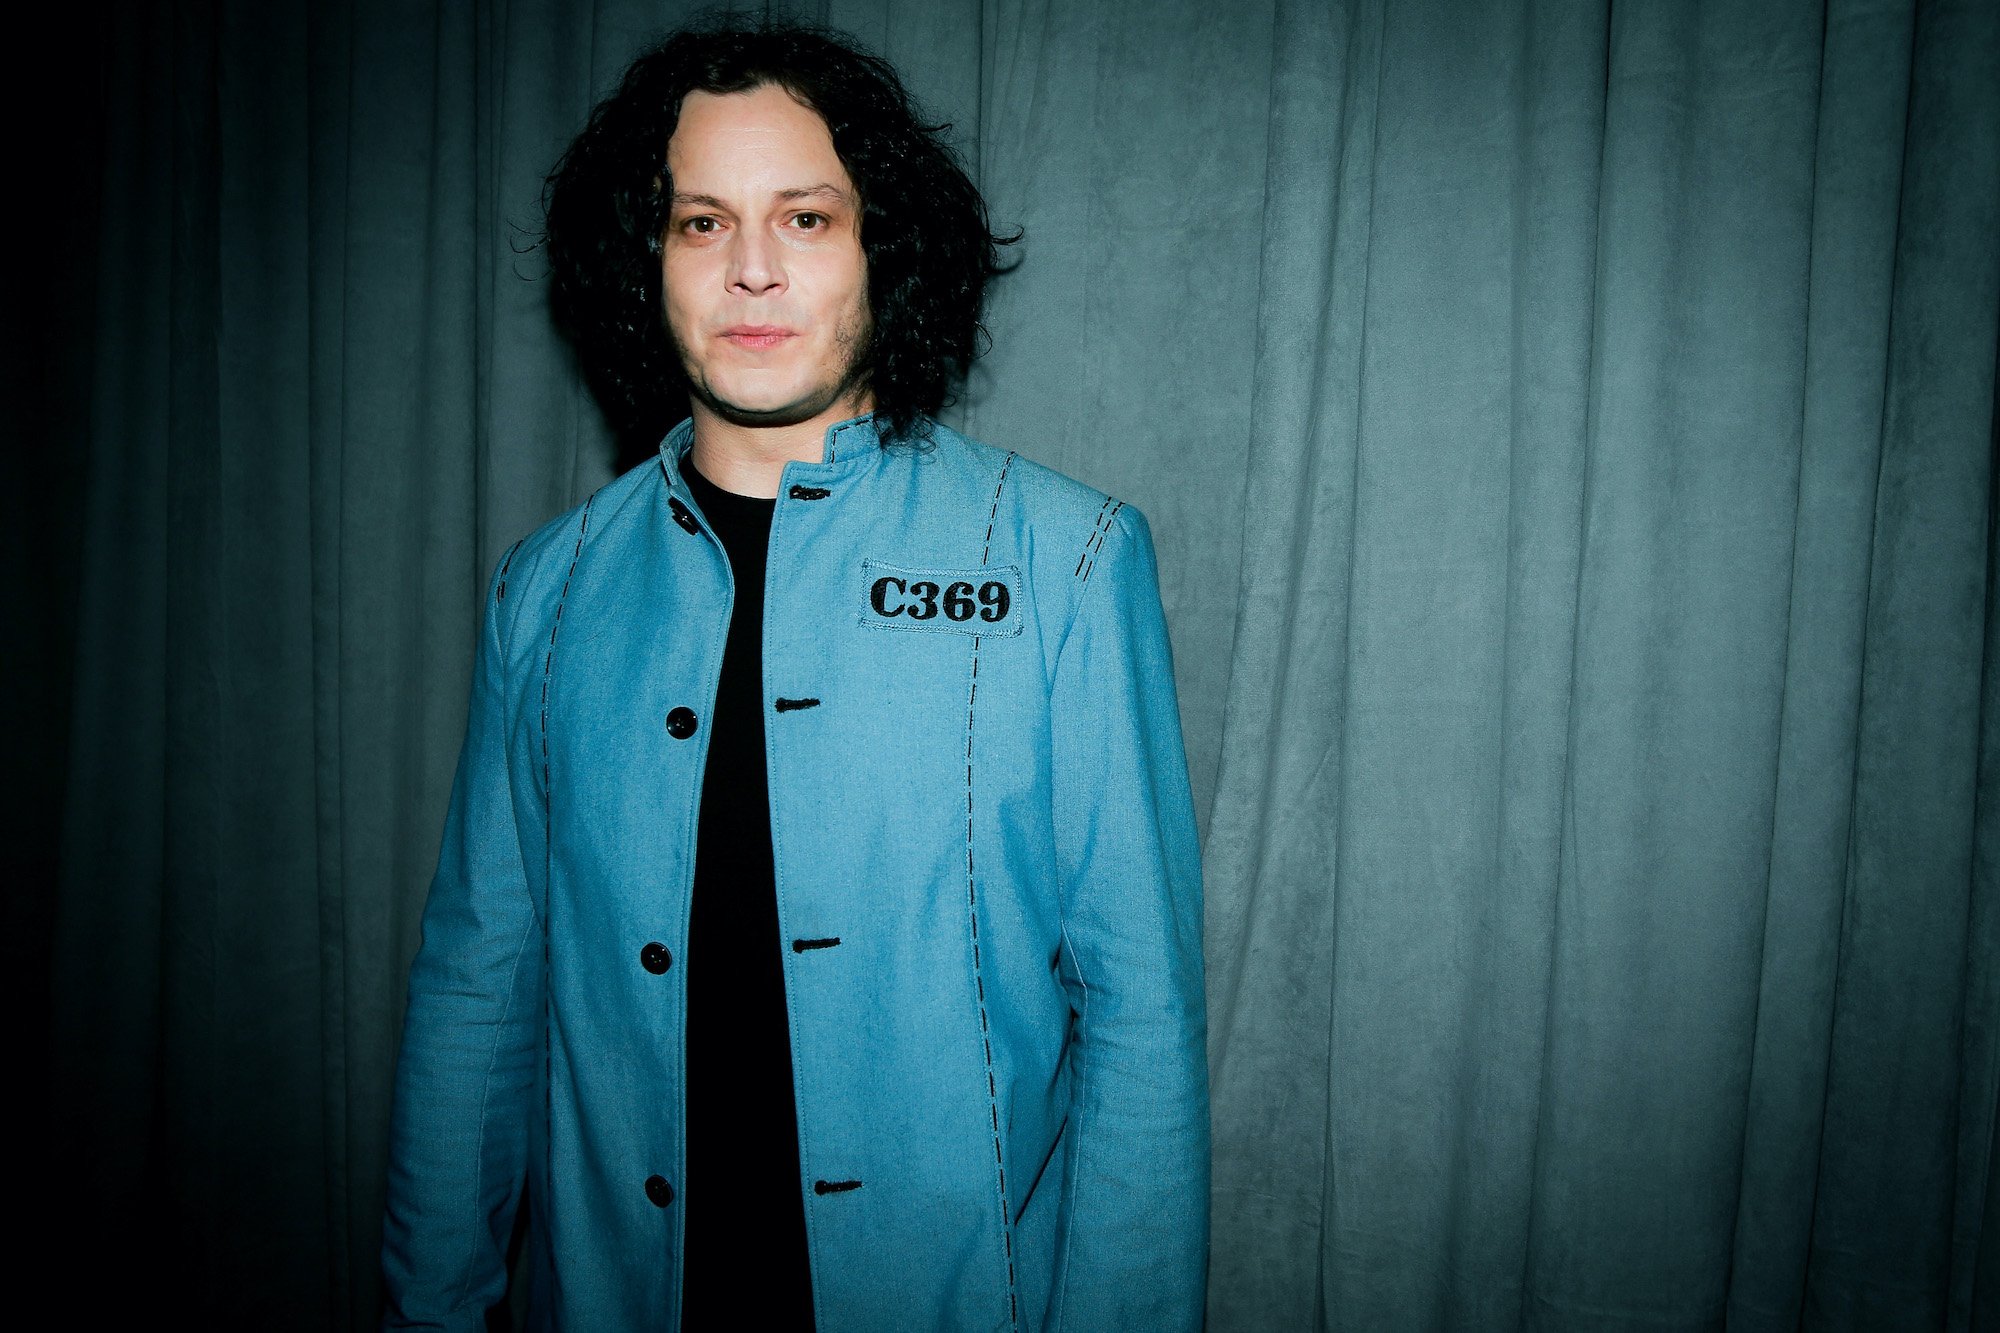 Jack White smiling in front of a green curtain